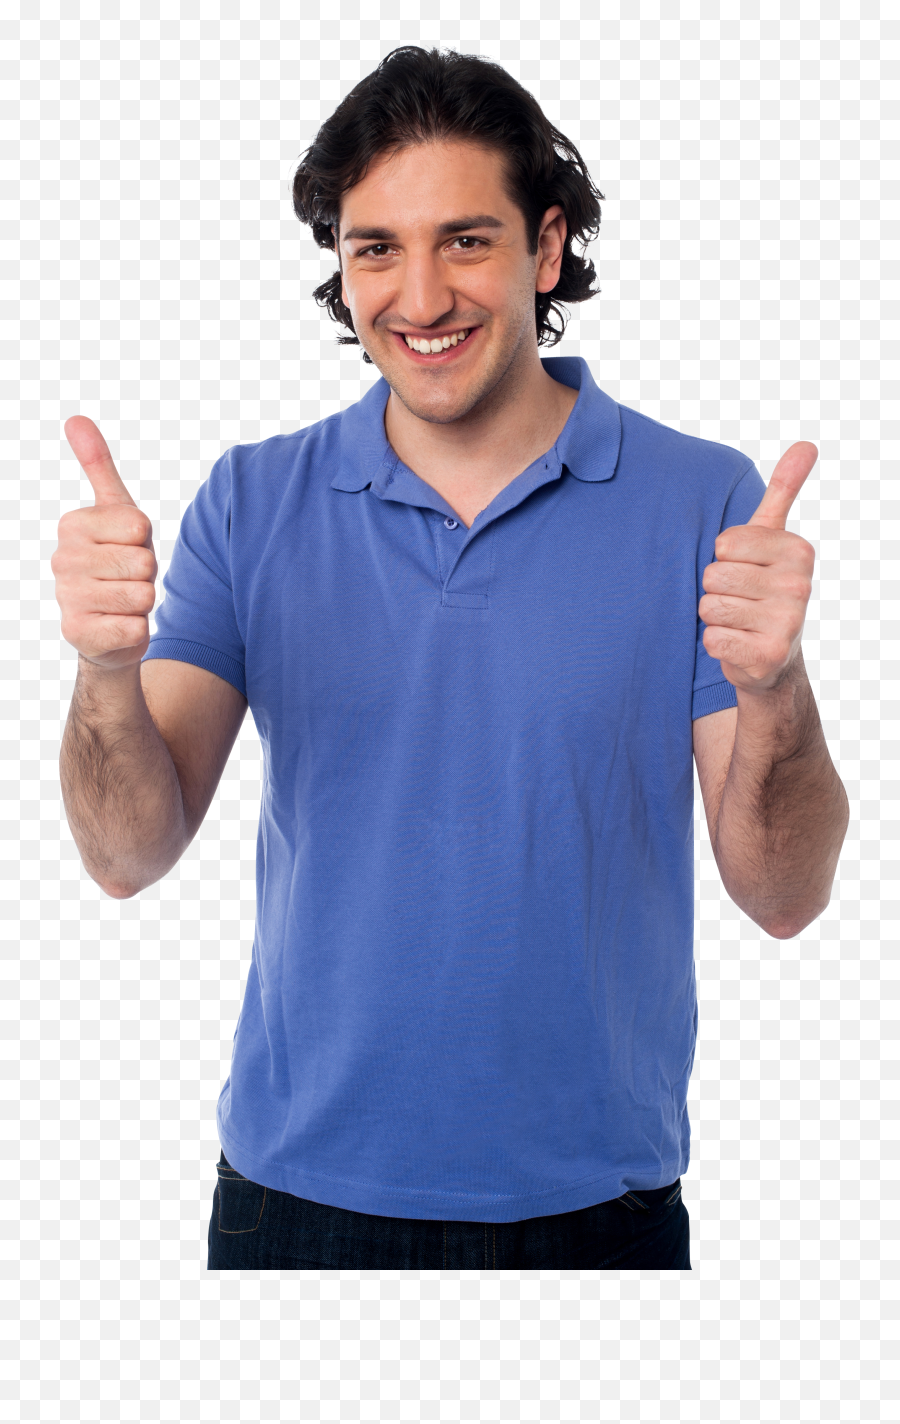 Men Pointing Thumbs Up Png Image - People Thumbs Up Png Emoji,Thumbs Up Png